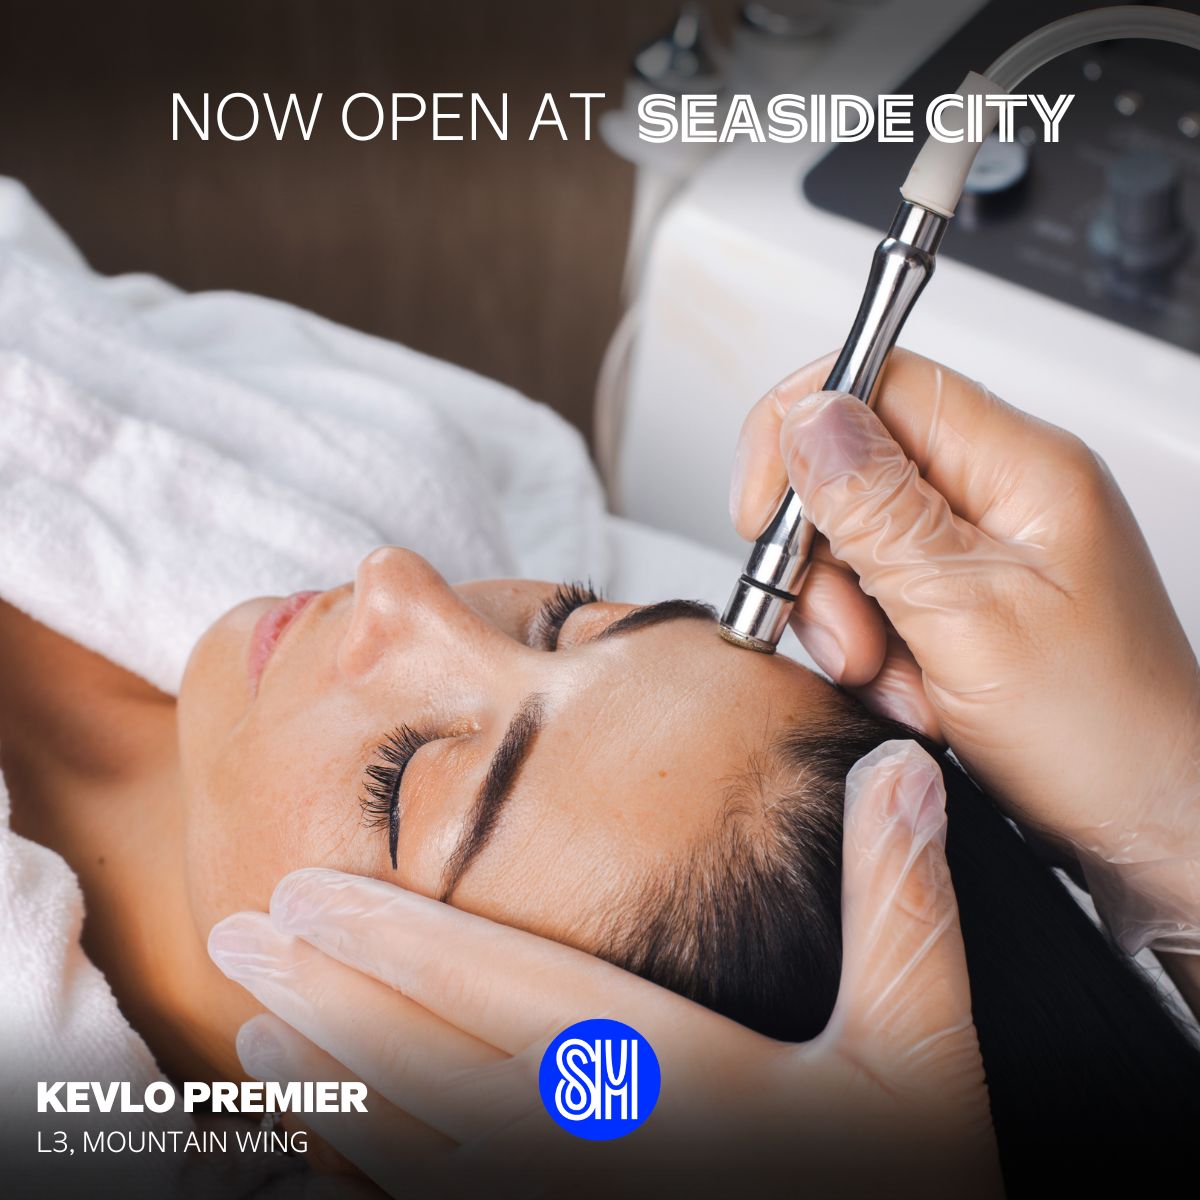 ✨ What's New at Seaside City ✨ KEVLO PREMIER is NOW OPEN! 🤩 Discover the ultimate path to radiant, healthy skin and get that glow at KEVLO! Visit them at the Third Level, Mountain Wing today! ✨ #EverythingsHereAtSM #AWorldOfExperienceAtSM